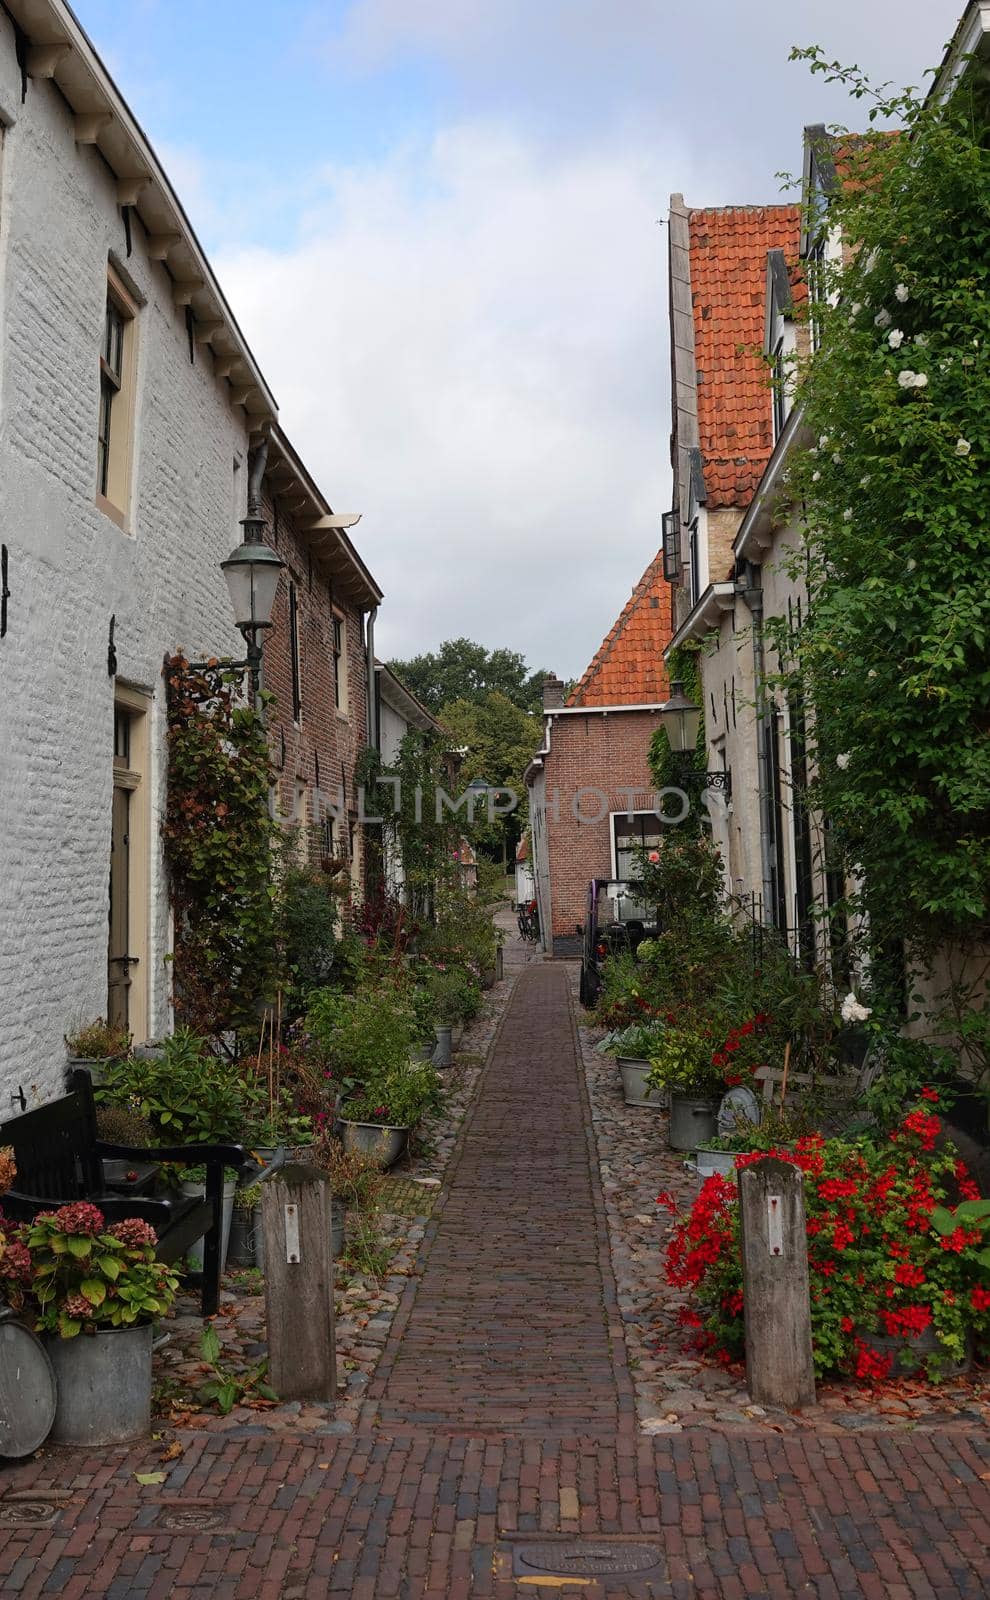 Alley near to the fortified wall with small, old houses with flower pots in front in the center of Elburg in the Netherlands.